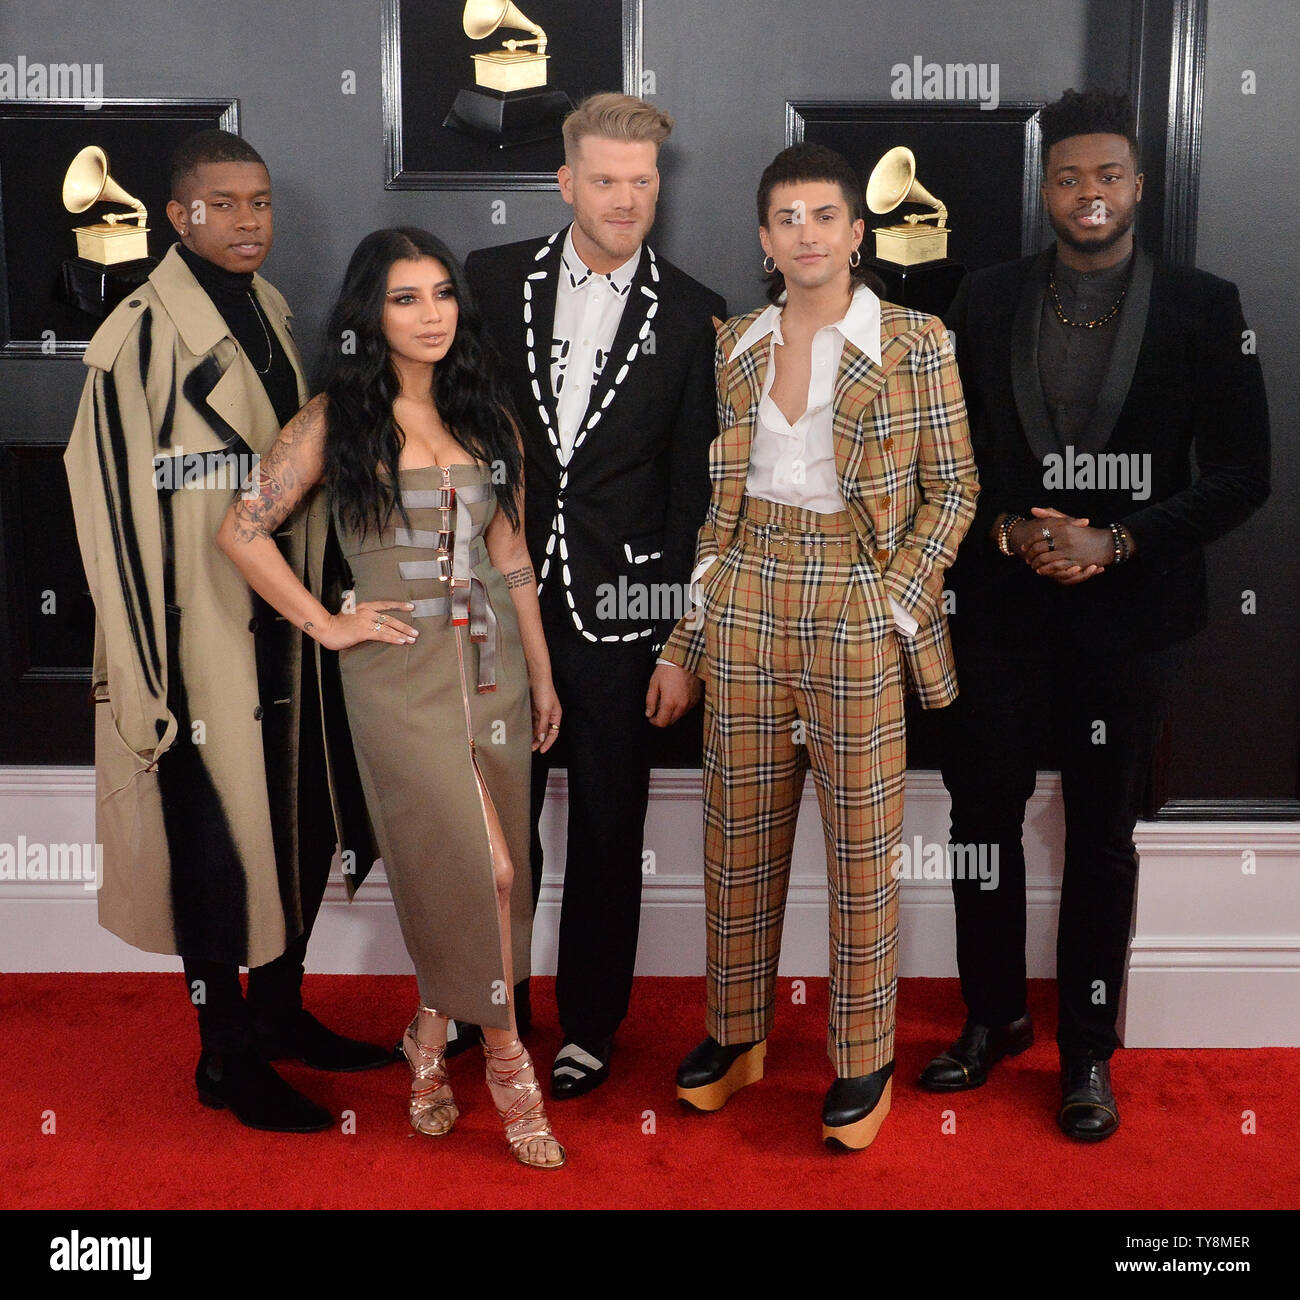 L-R) Matt Sallee, Kirstin Maldonado, Scott Hoying, Mitch Grassi and Kevin  Olusola arrive for the 61st annual Grammy Awards held at Staples Center in  Los Angeles on February 10, 2019. Photo by